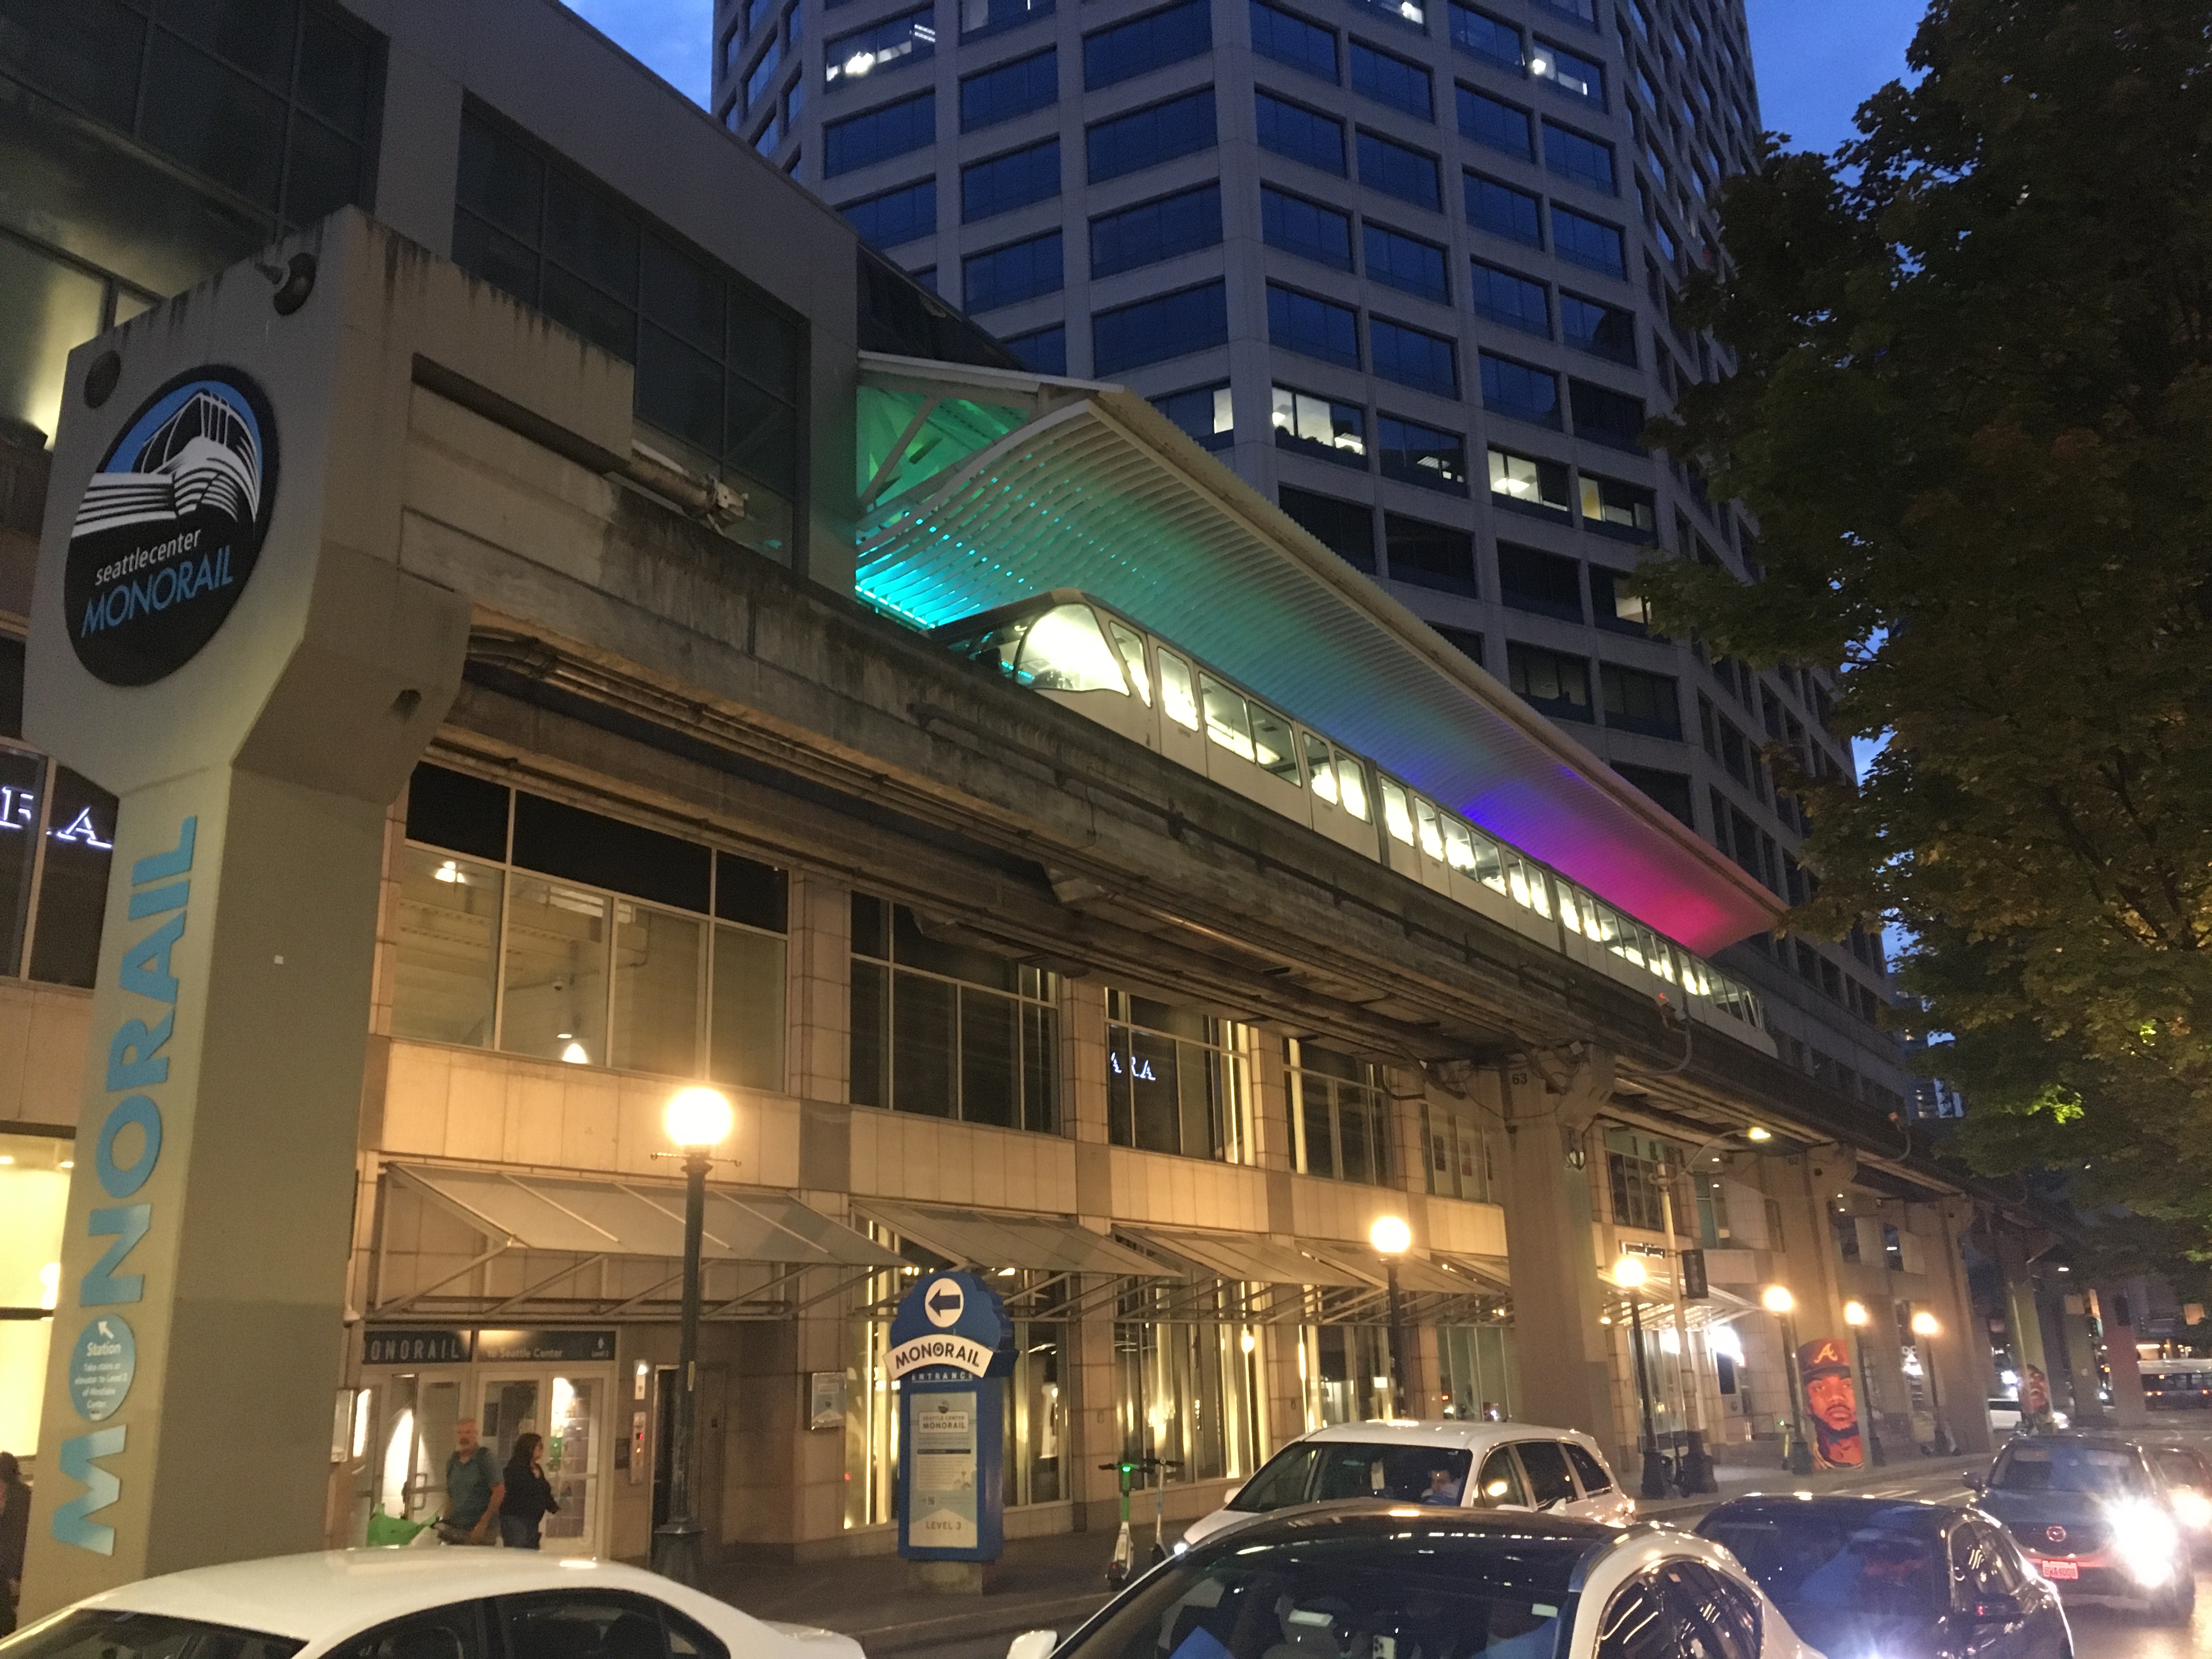 The Seattle monorail in the evening